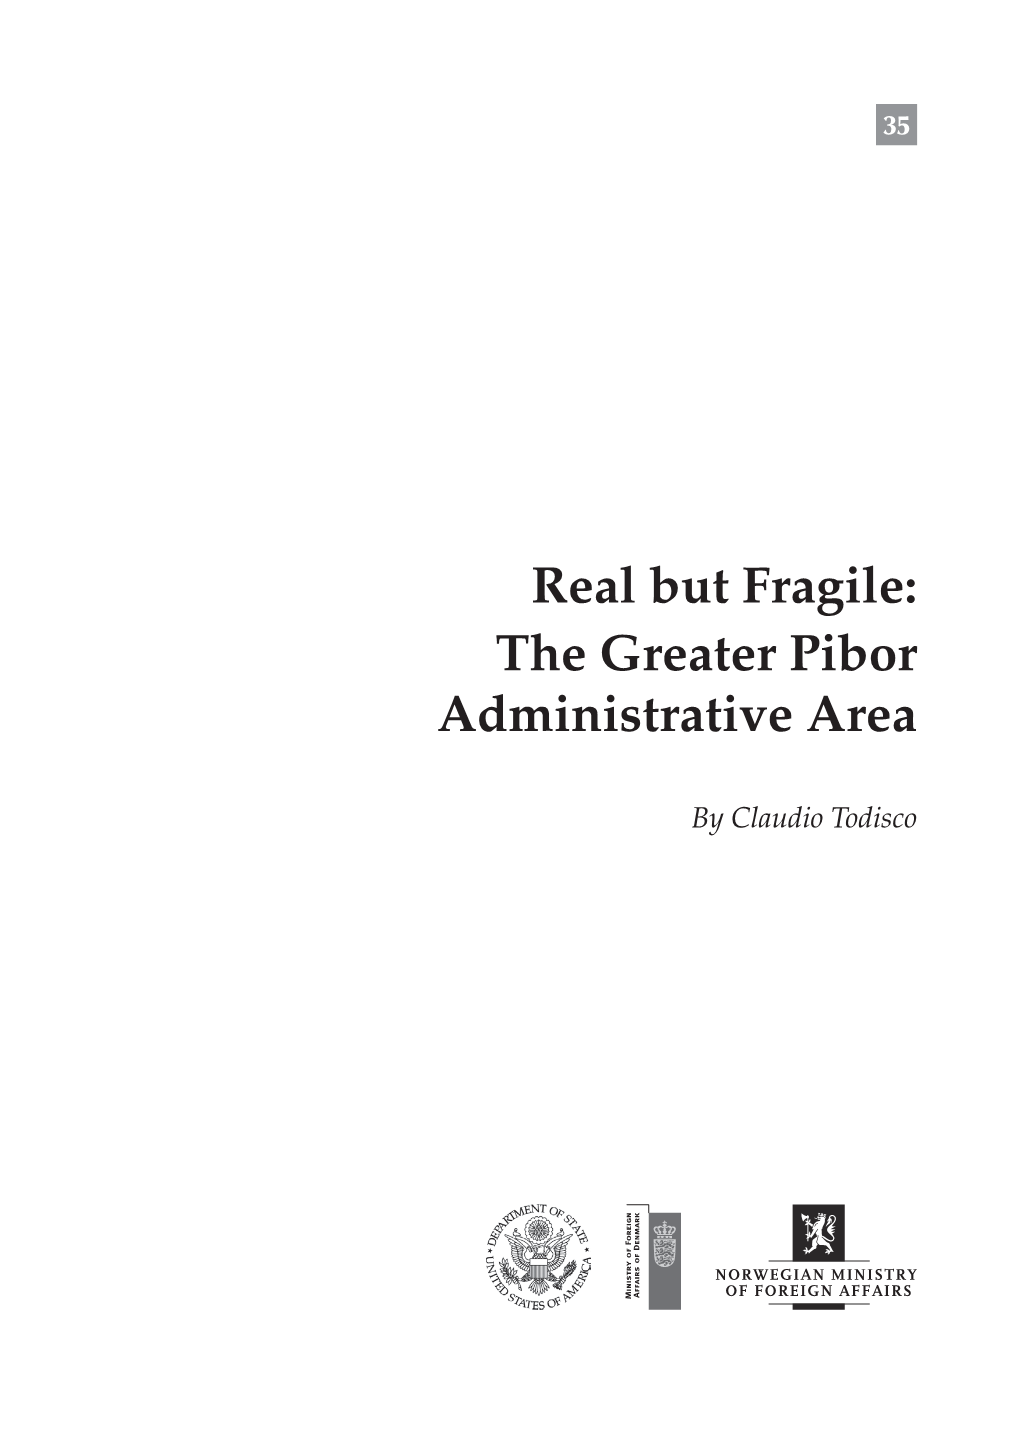 Real but Fragile: the Greater Pibor Administrative Area